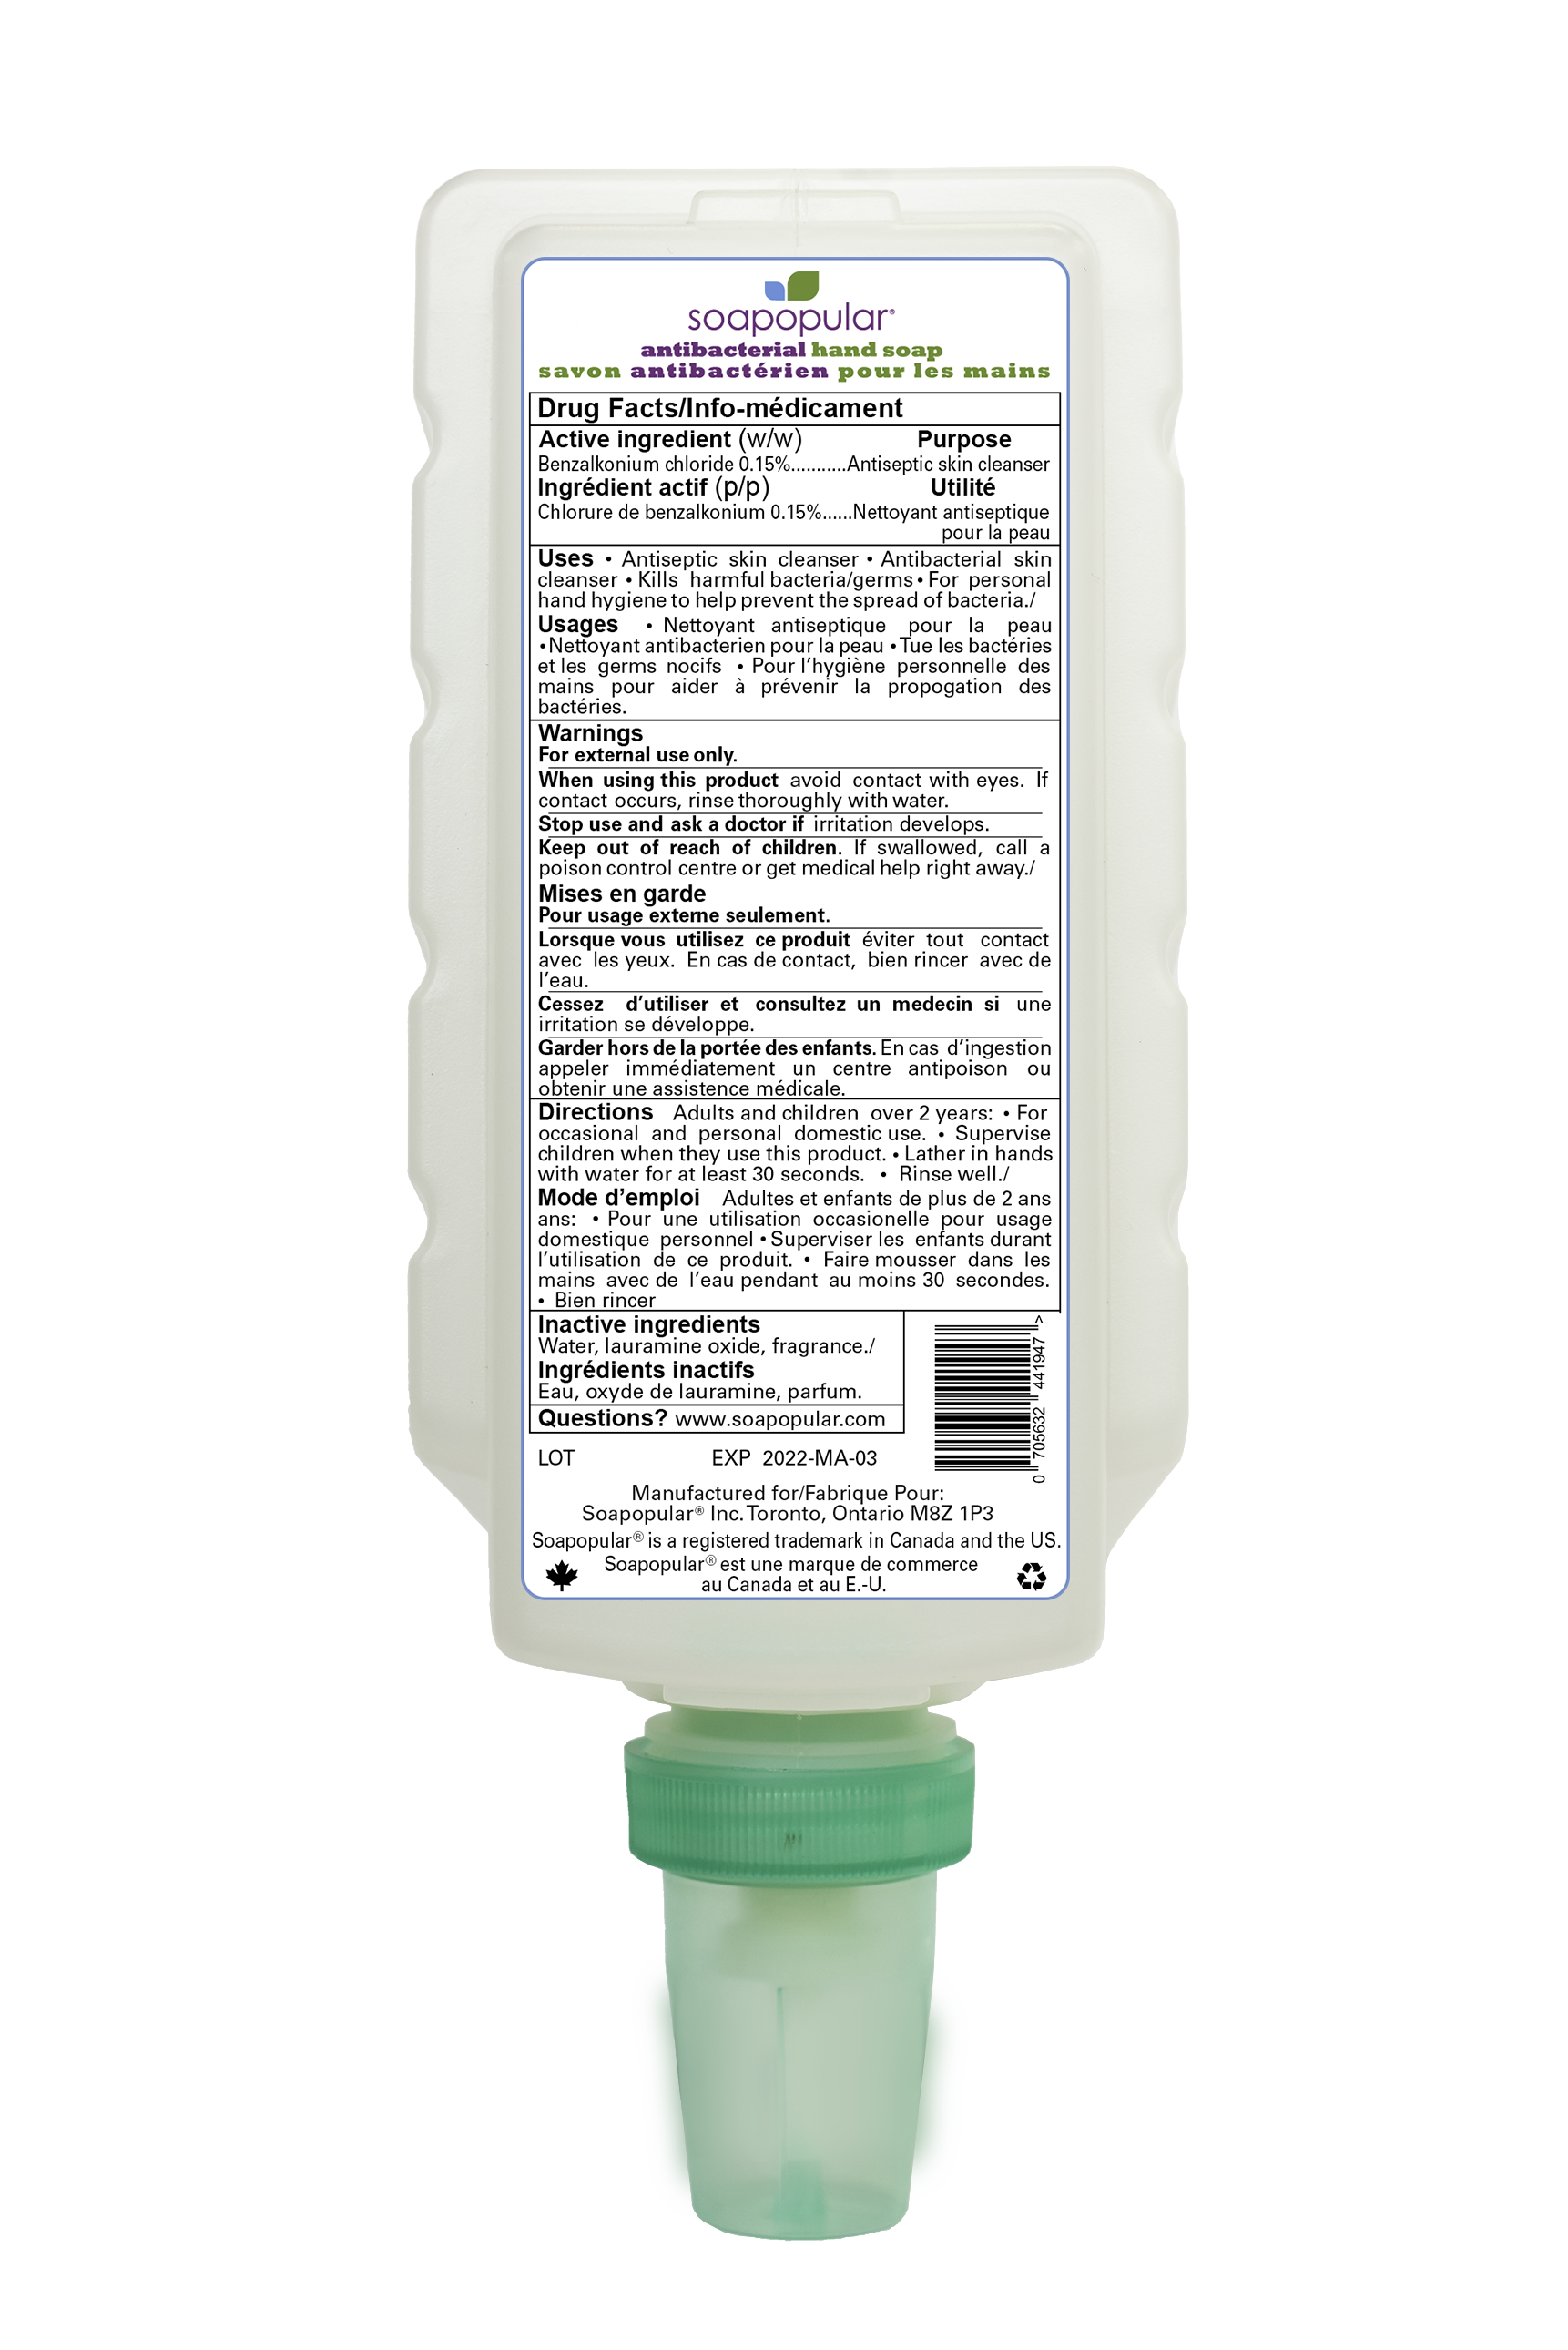 Soapopular triclosan free hand soap cartridge fill can be used to refill manual dispensers.